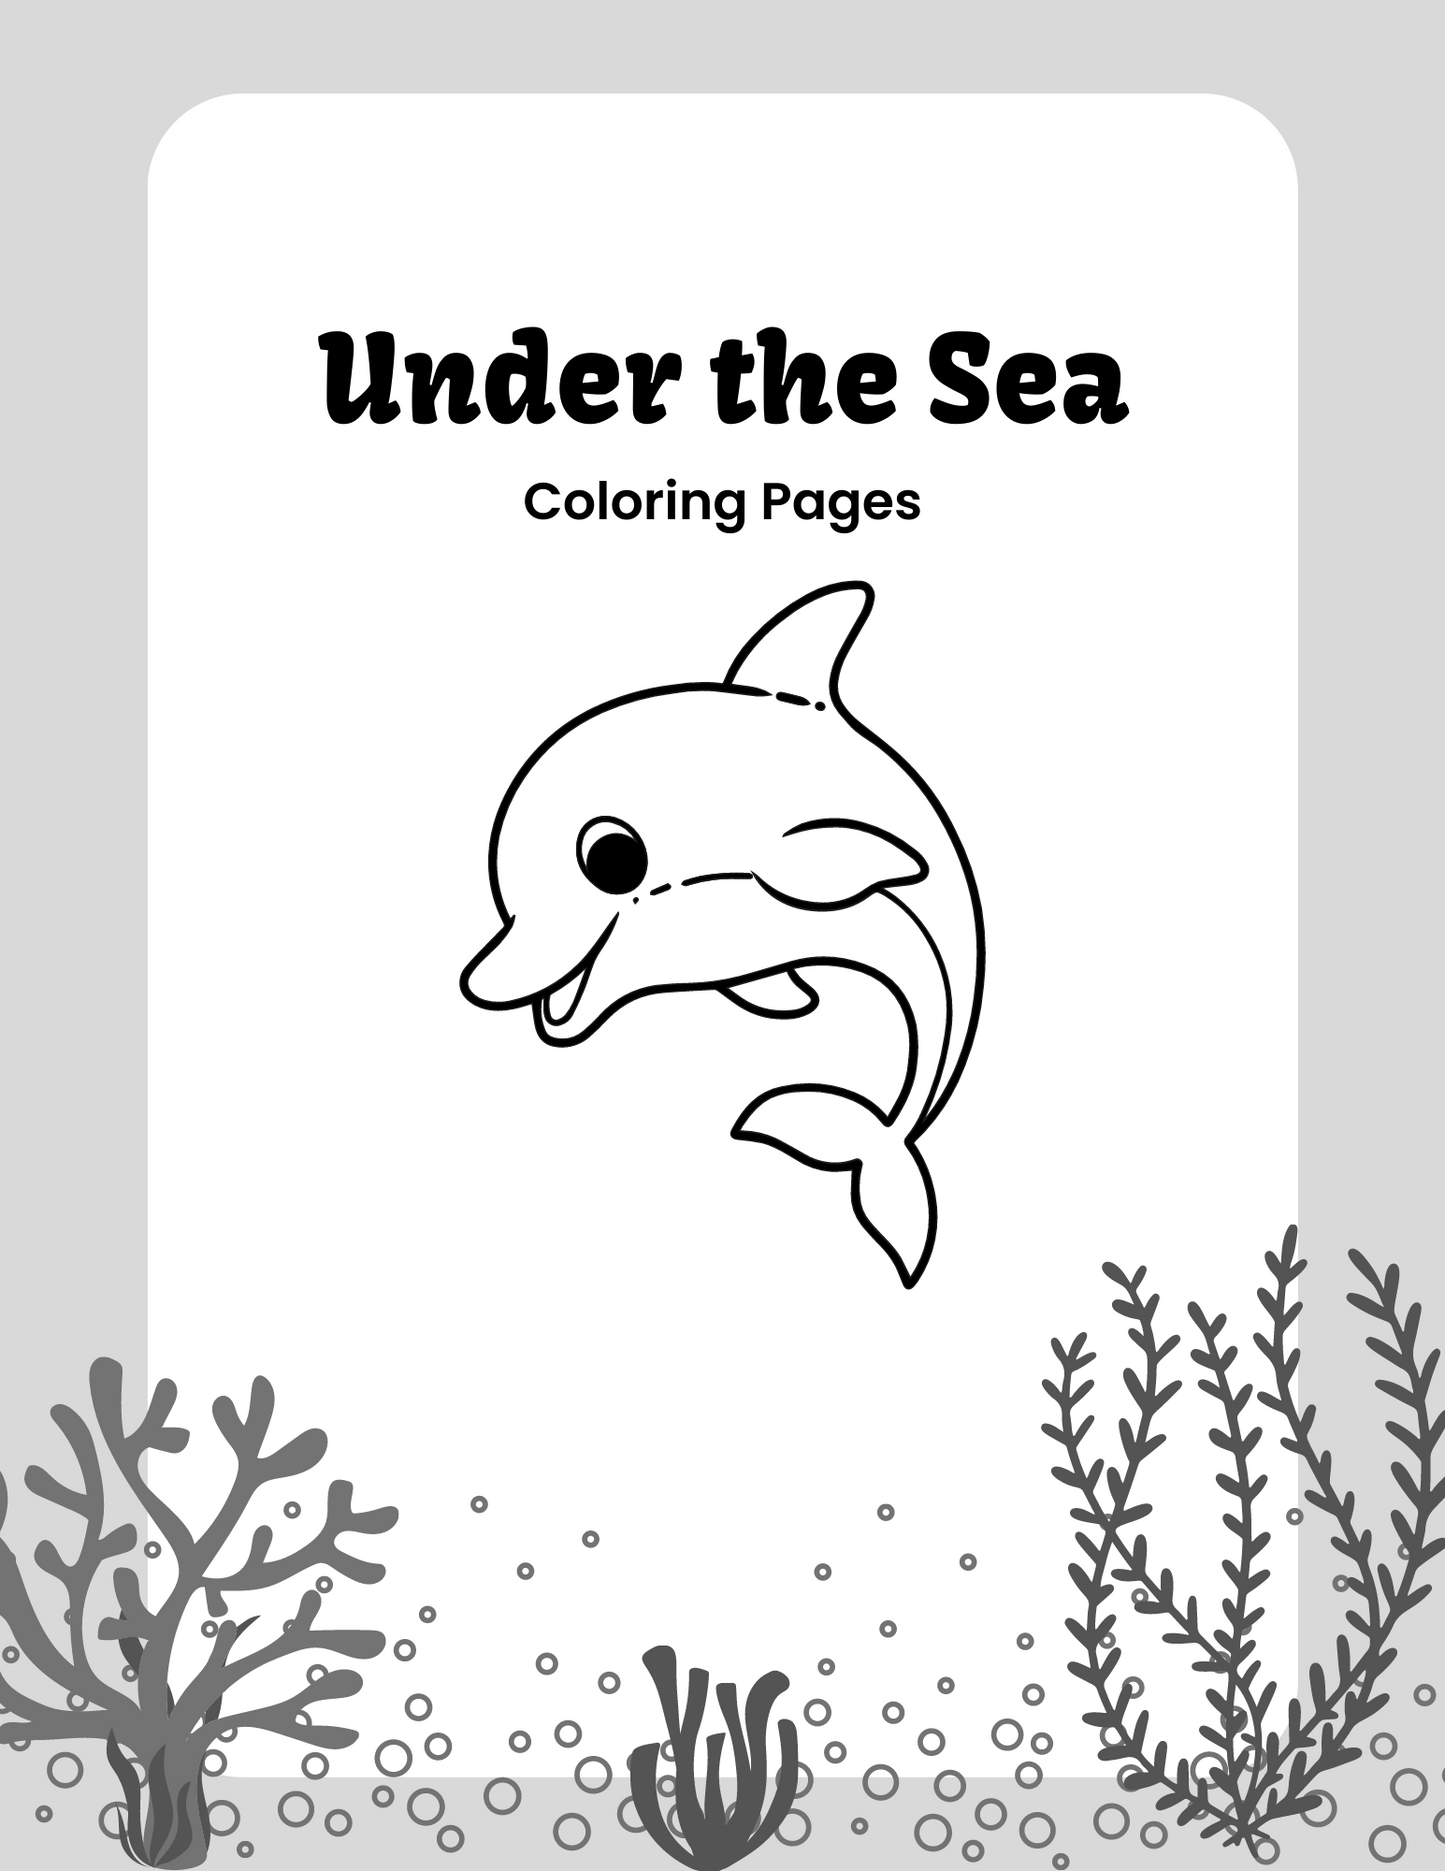 Under the Sea - Coloring Book